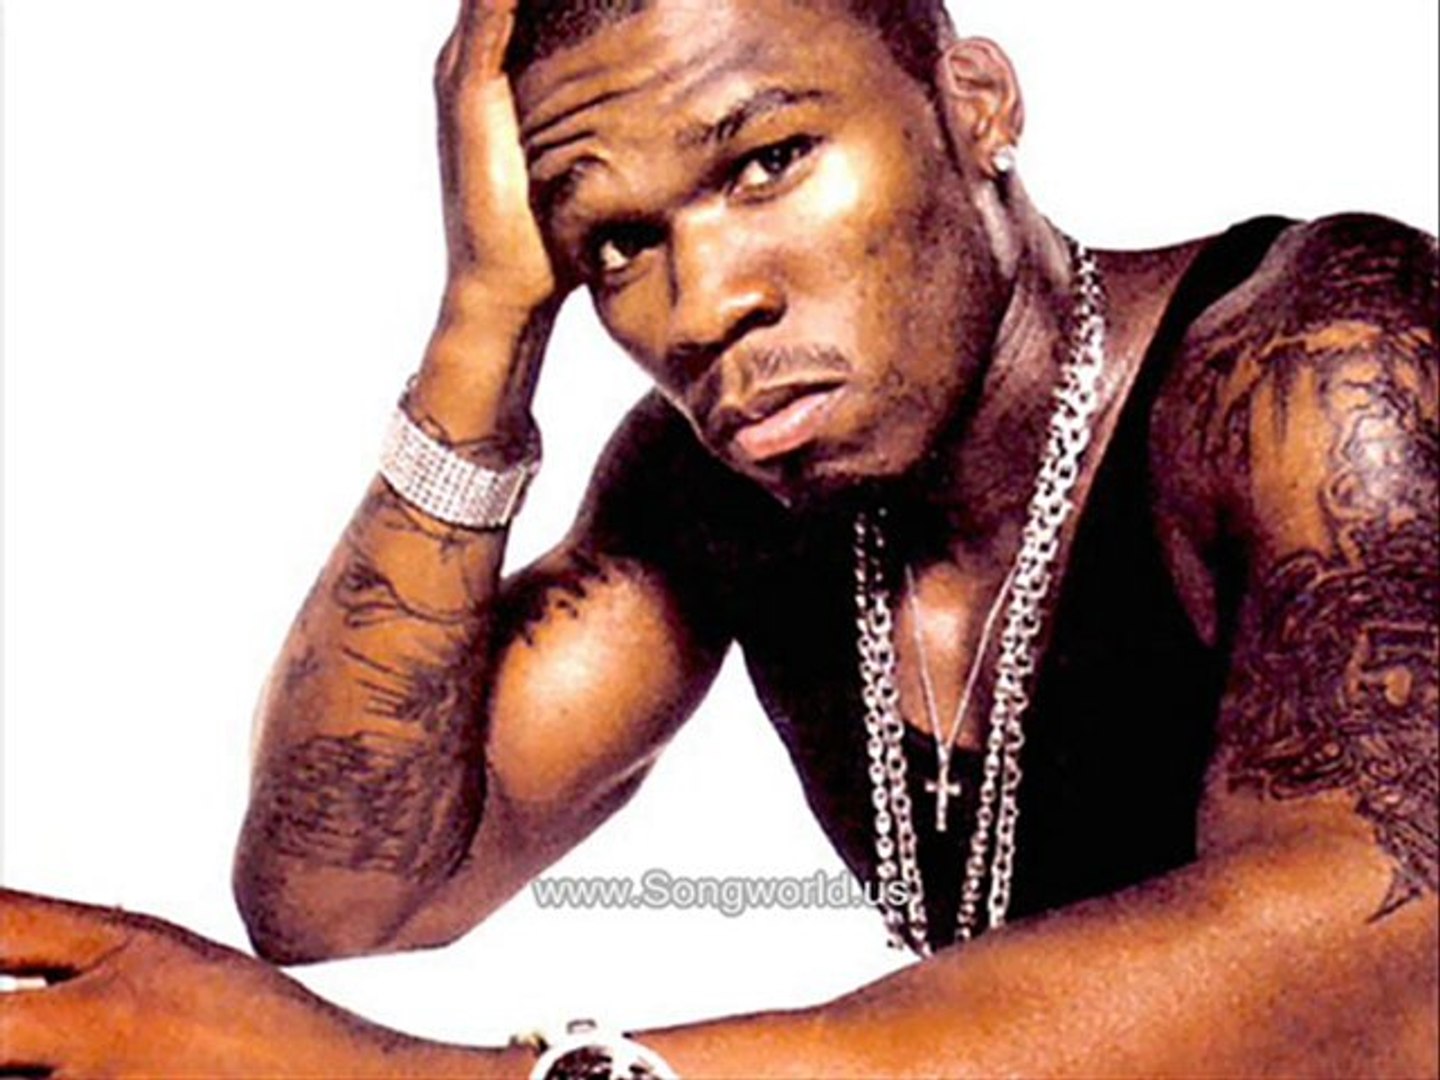 mp3 50 Cent song download - video Dailymotion